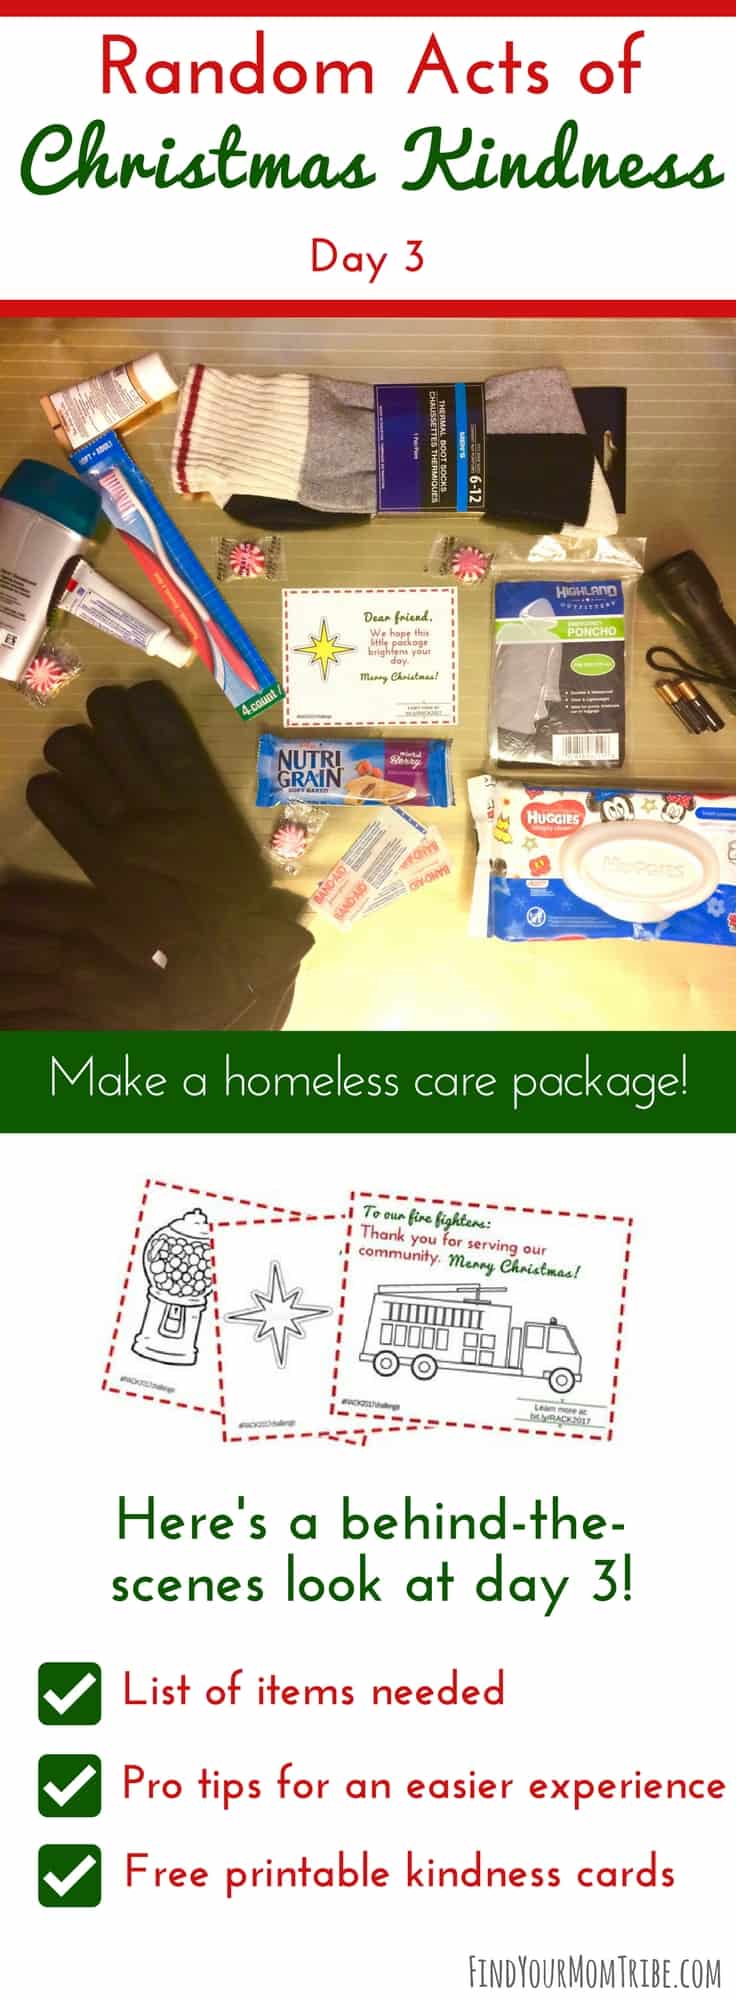 What a great idea! How to create a care package for the homeless. Join the Random Acts of Christmas Kindness challenge and grab your free printable kindness cards! #Christmas #MerryChristmas #blessothers #Christmas2017 #Christmasprintables #RandomActsofKindness #RandomActsofChristmasKindness #freekindnesscards #RACK #ROAK